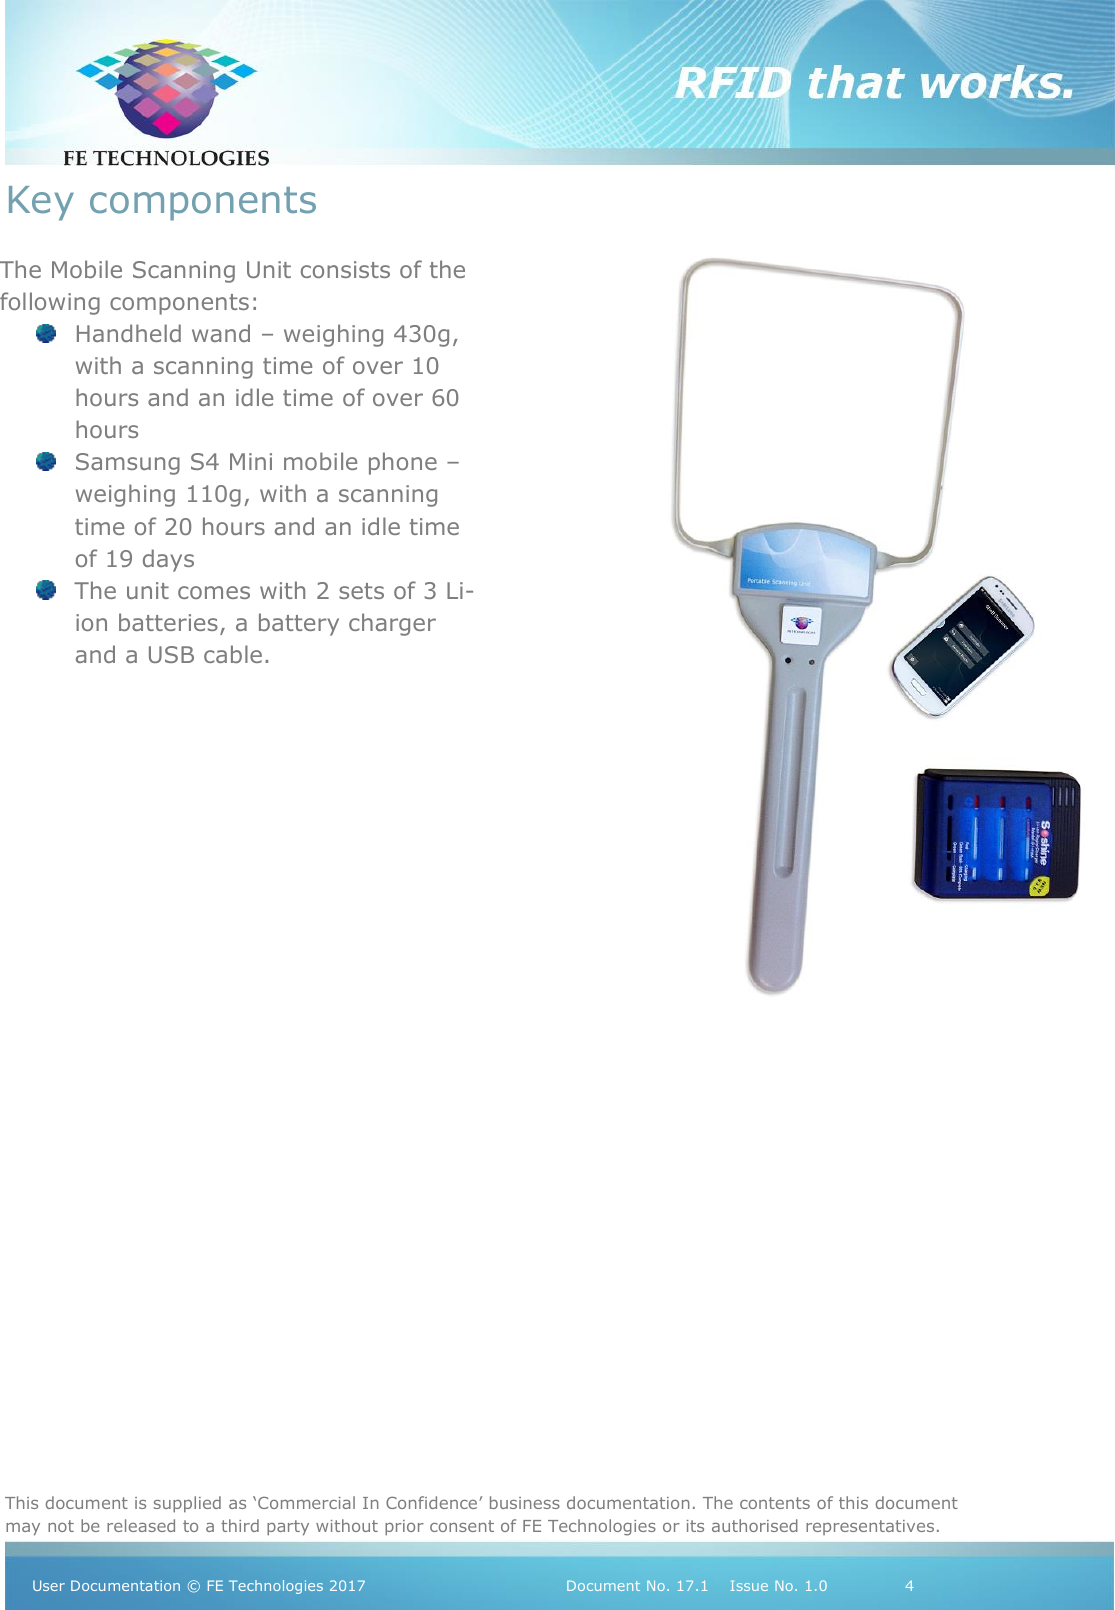   This document is supplied as ‘Commercial In Confidence’ business documentation. The contents of this document may not be released to a third party without prior consent of FE Technologies or its authorised representatives.  User Documentation © FE Technologies 2017                                 Document No. 17.1    Issue No. 1.0               4  Key components                   The Mobile Scanning Unit consists of the following components:  Handheld wand – weighing 430g, with a scanning time of over 10 hours and an idle time of over 60 hours  Samsung S4 Mini mobile phone – weighing 110g, with a scanning time of 20 hours and an idle time of 19 days  The unit comes with 2 sets of 3 Li-ion batteries, a battery charger and a USB cable.  